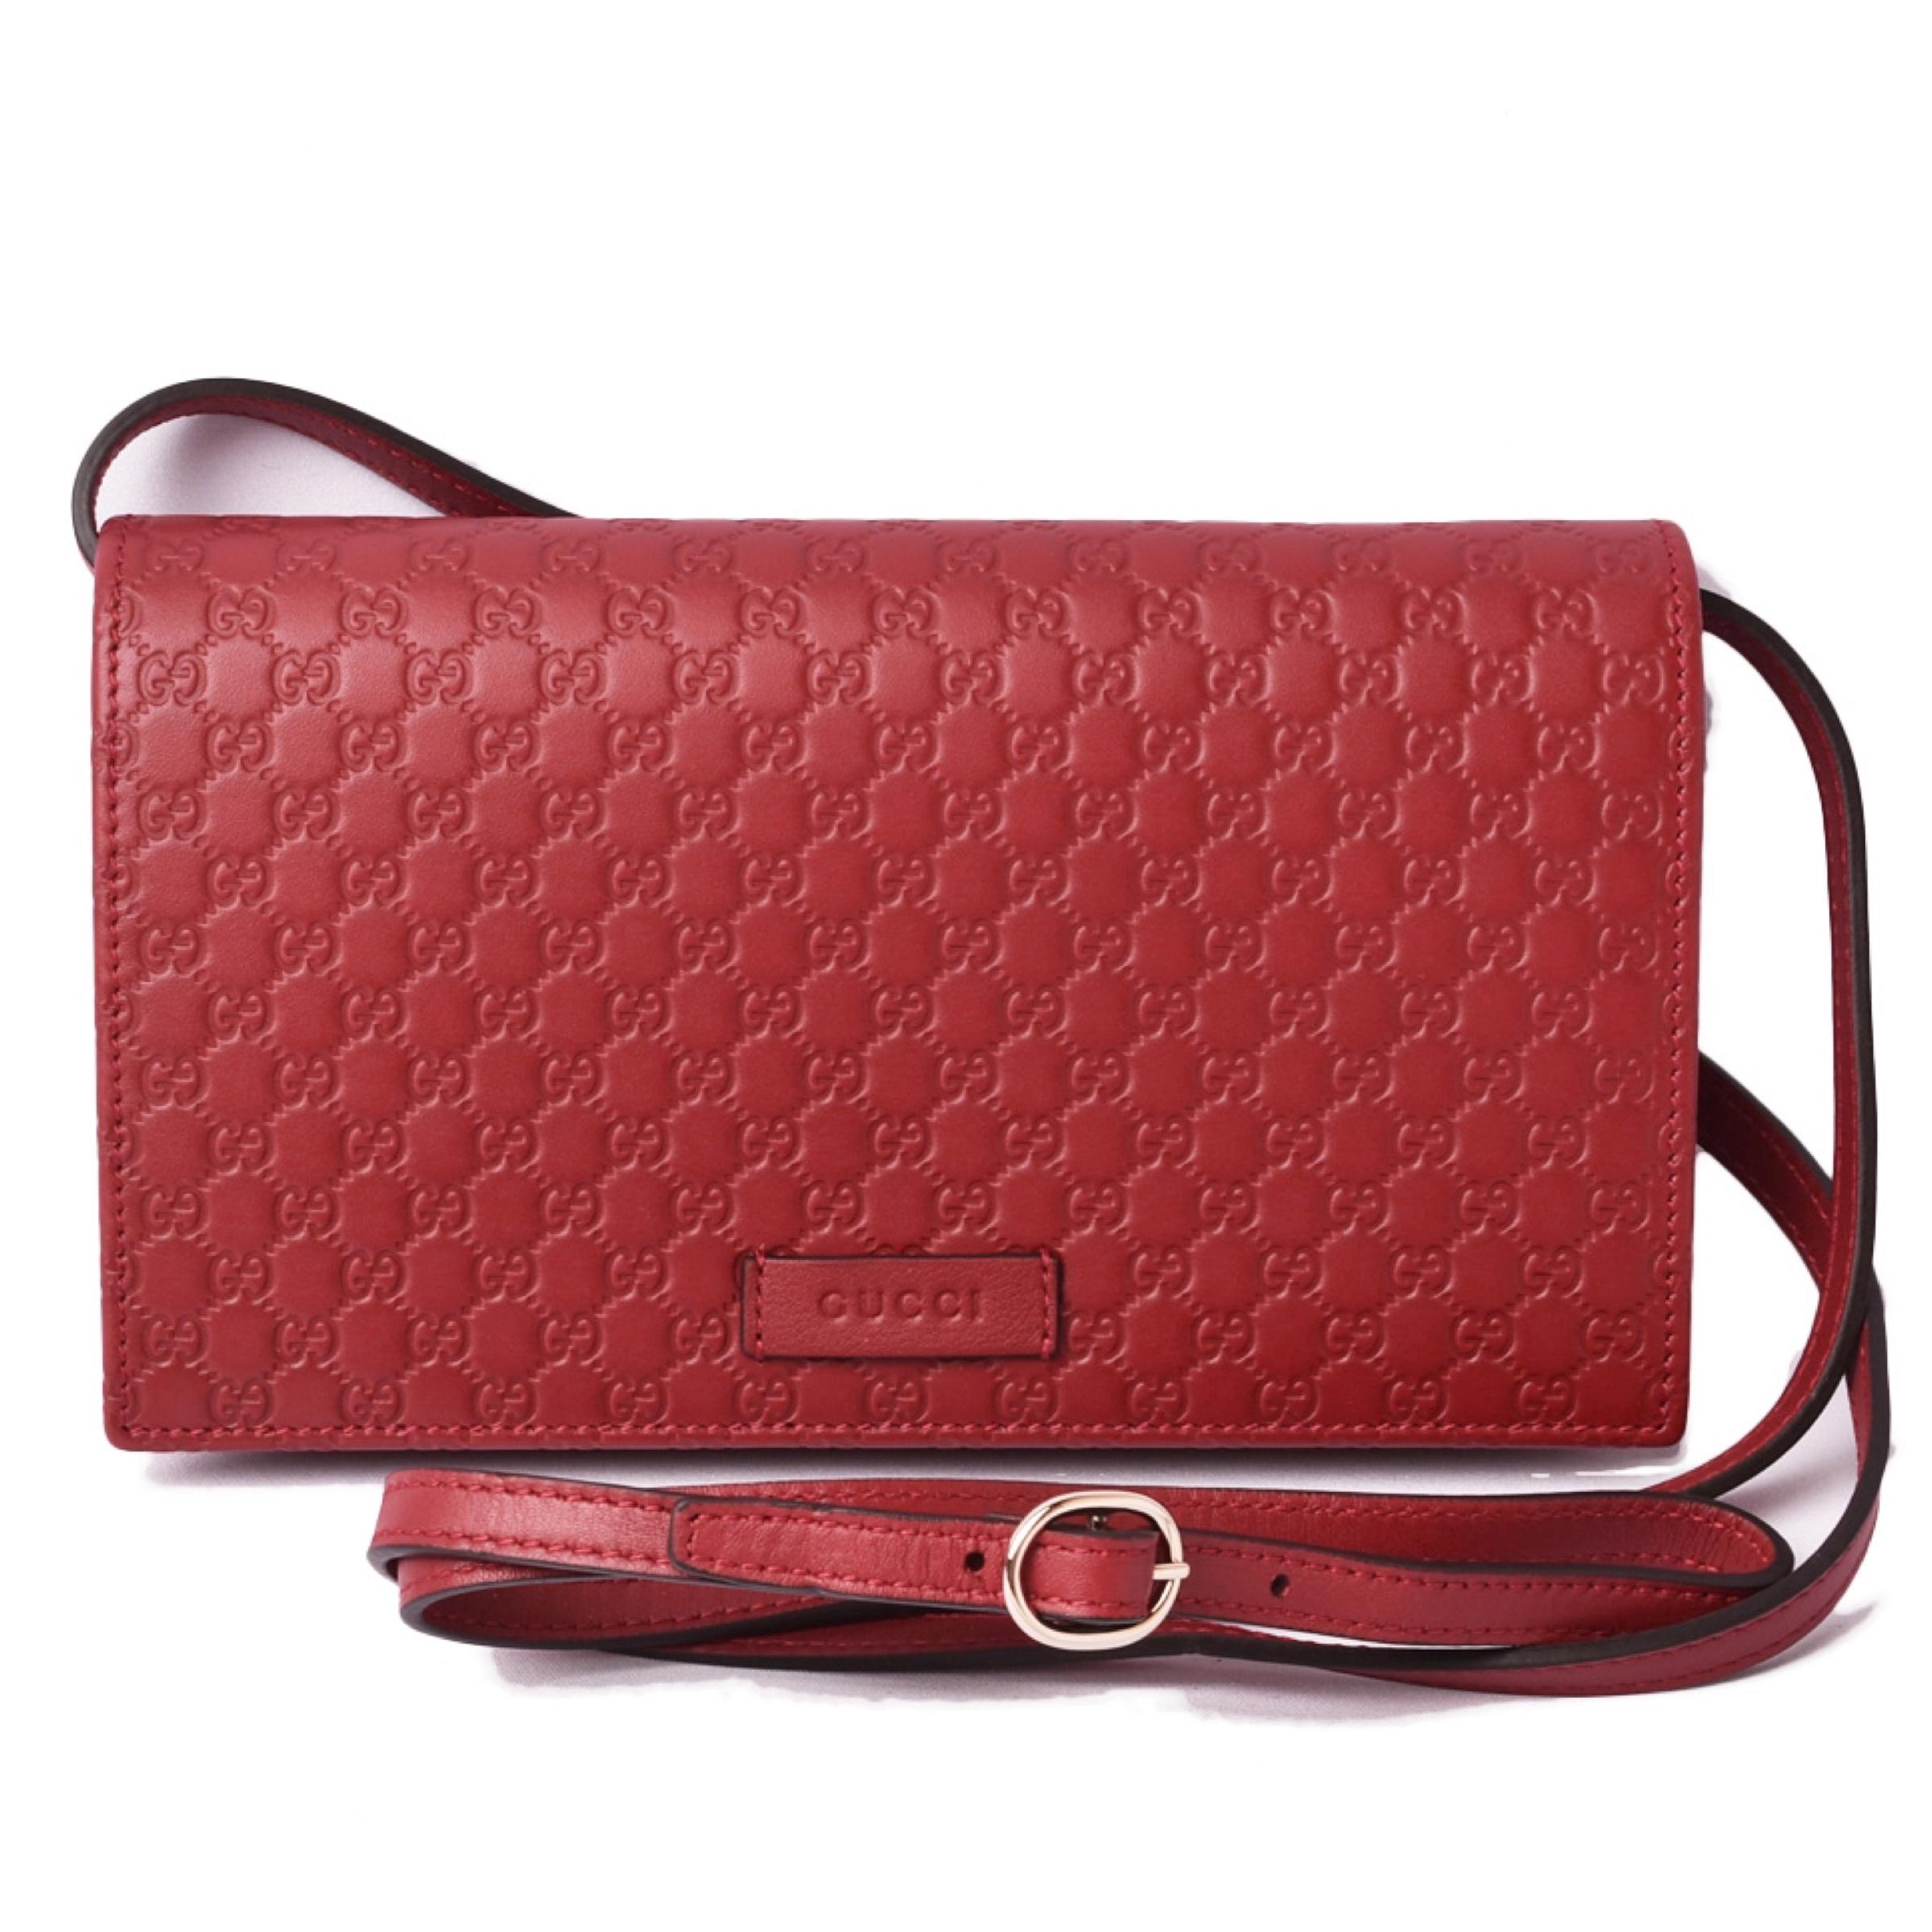 New Gucci Red Micro GG Guccissima Crossbody Wallet Bag Purse

Authenticity Guaranteed

DETAILS
Brand: Gucci
Condition: Brand new
Gender: Women
Category: Crossbody Bag
Color: Red
Material: Leather
Micro GG guccissima pattern 
Front Gucci leather